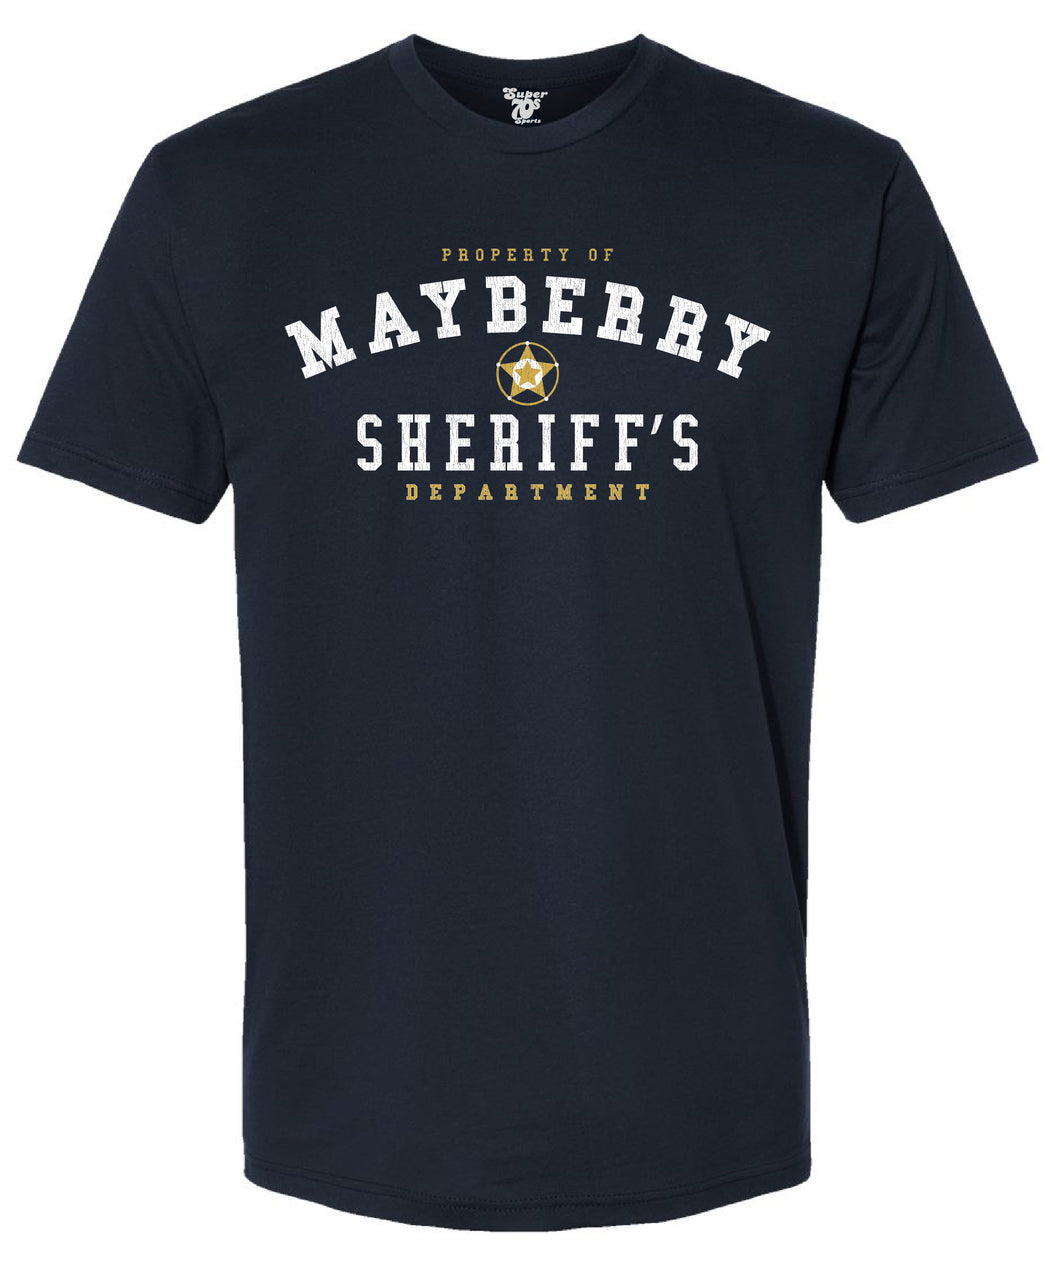 Mayberry Sheriff's Department Tee